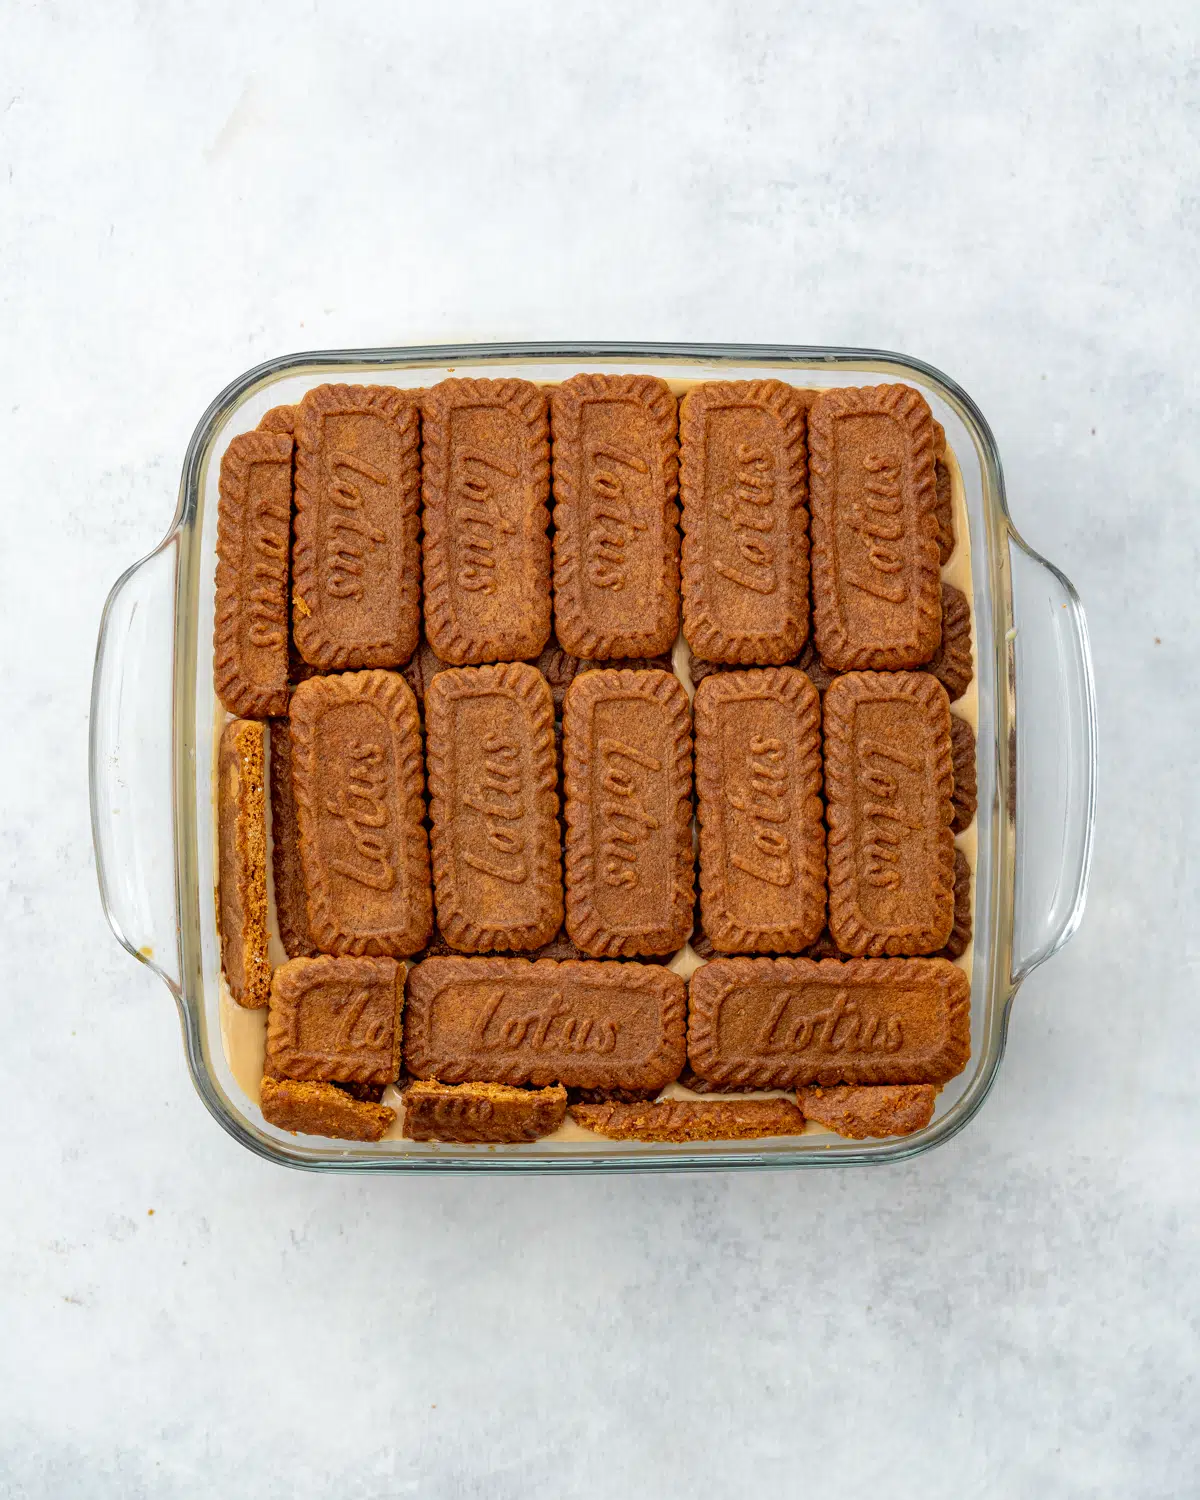 layer of espresso soaked biscoff cookies in a baking dish.